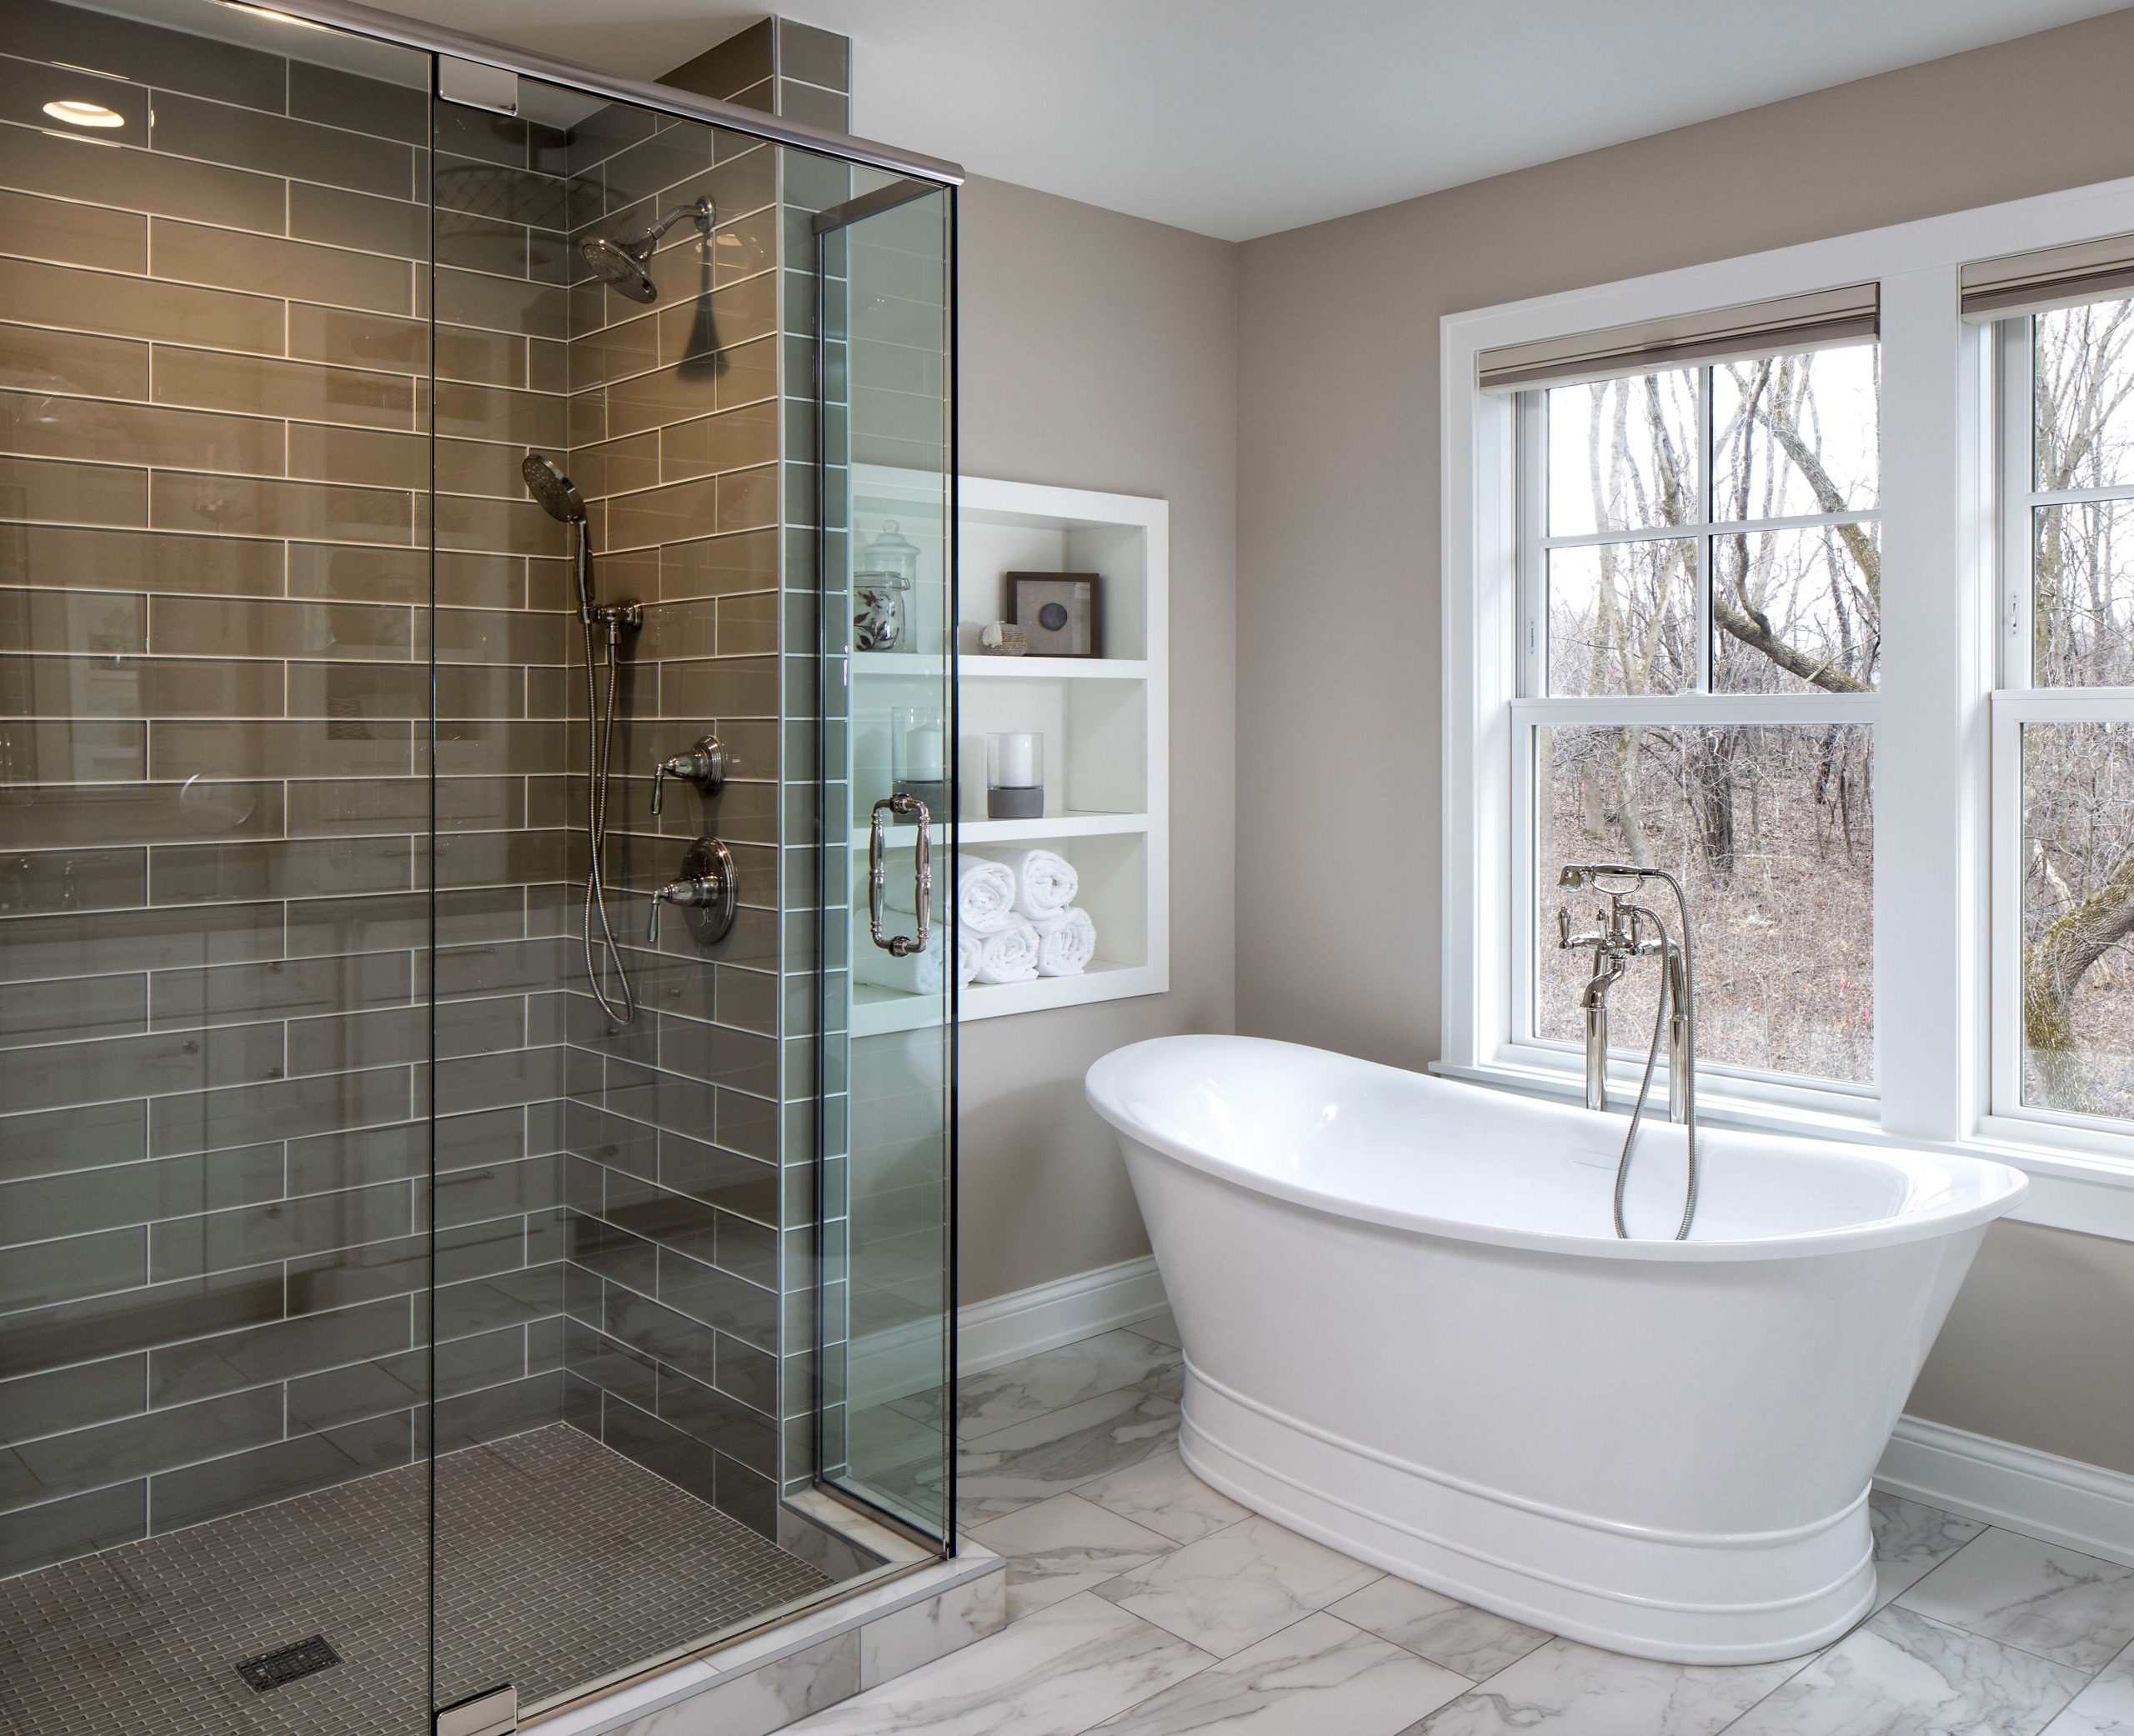 A bathroom with a glass shower and a large tub.